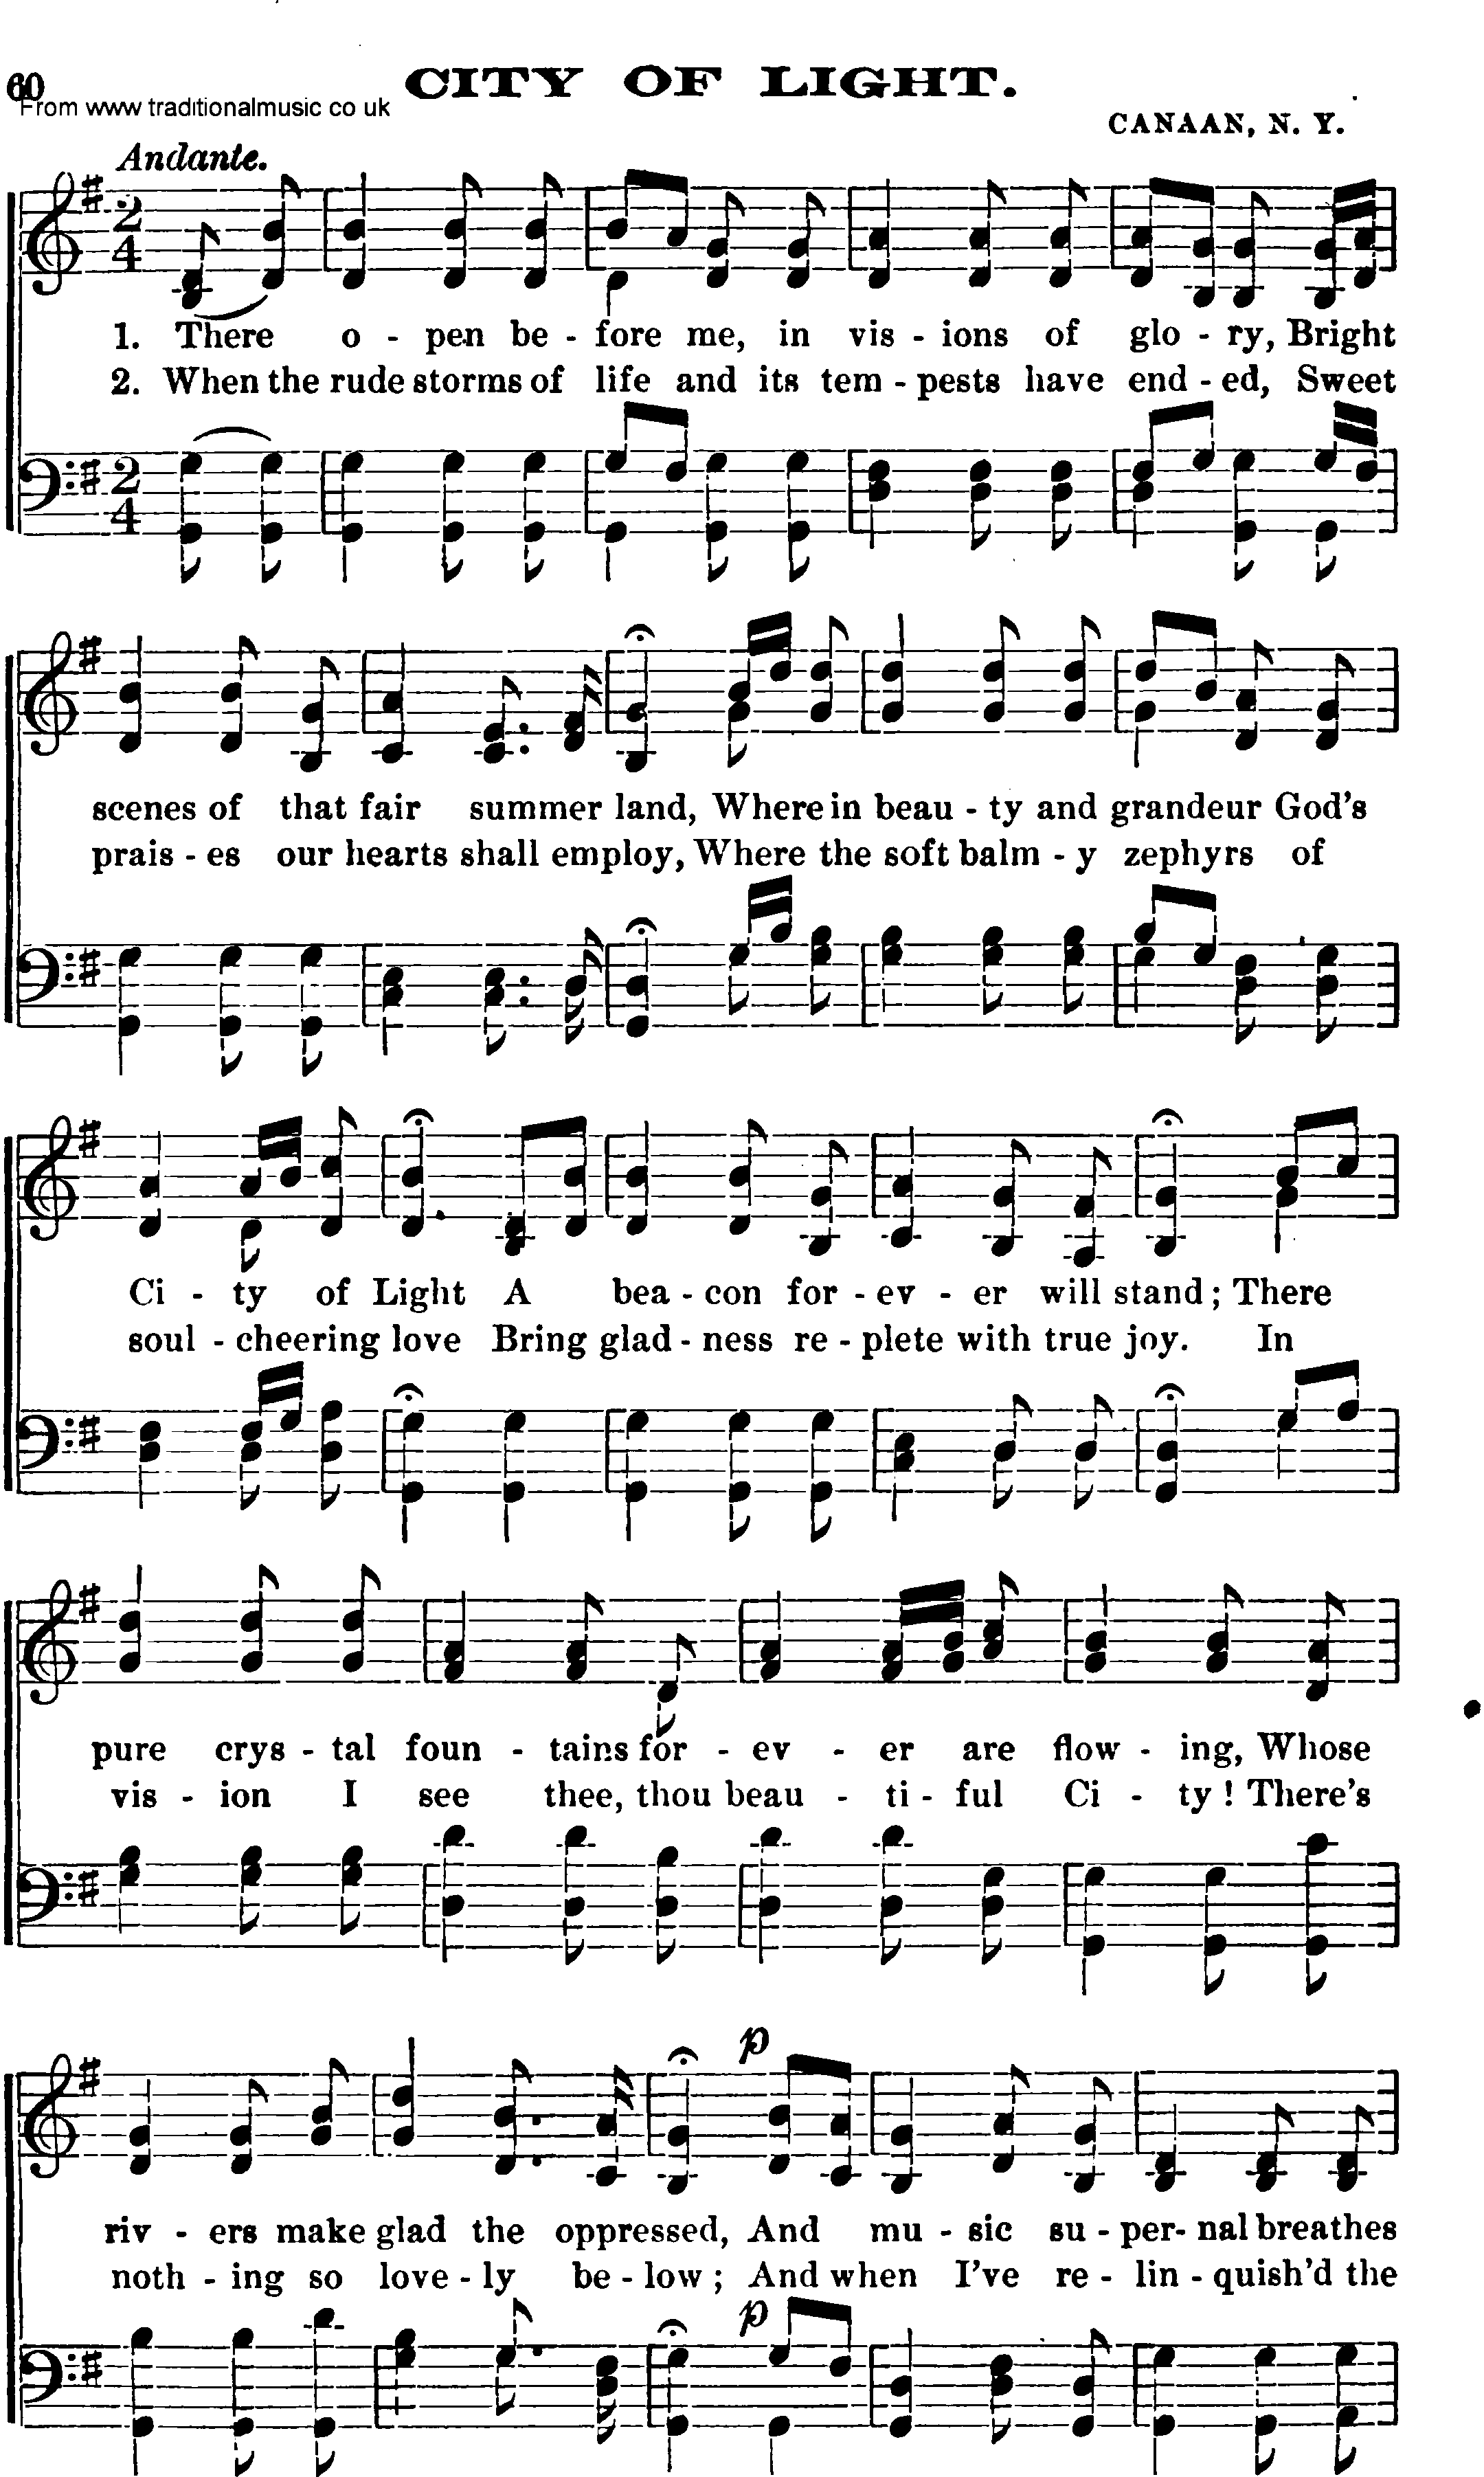 Shaker Music collection, Hymn: City Of Light, sheetmusic and PDF